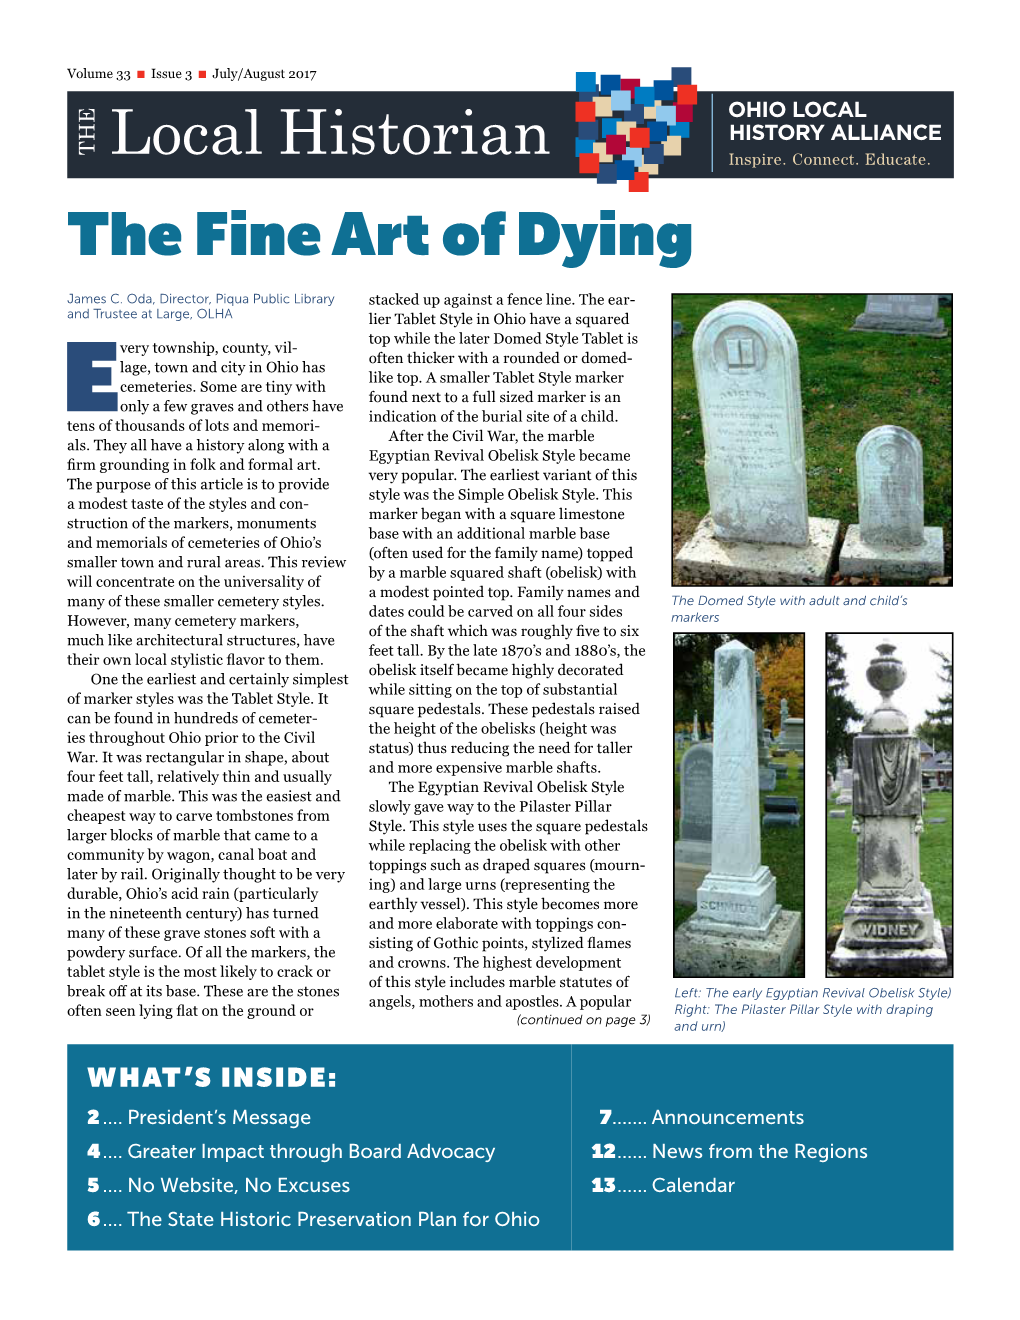 The Fine Art of Dying Feature Photo and Title Start Here